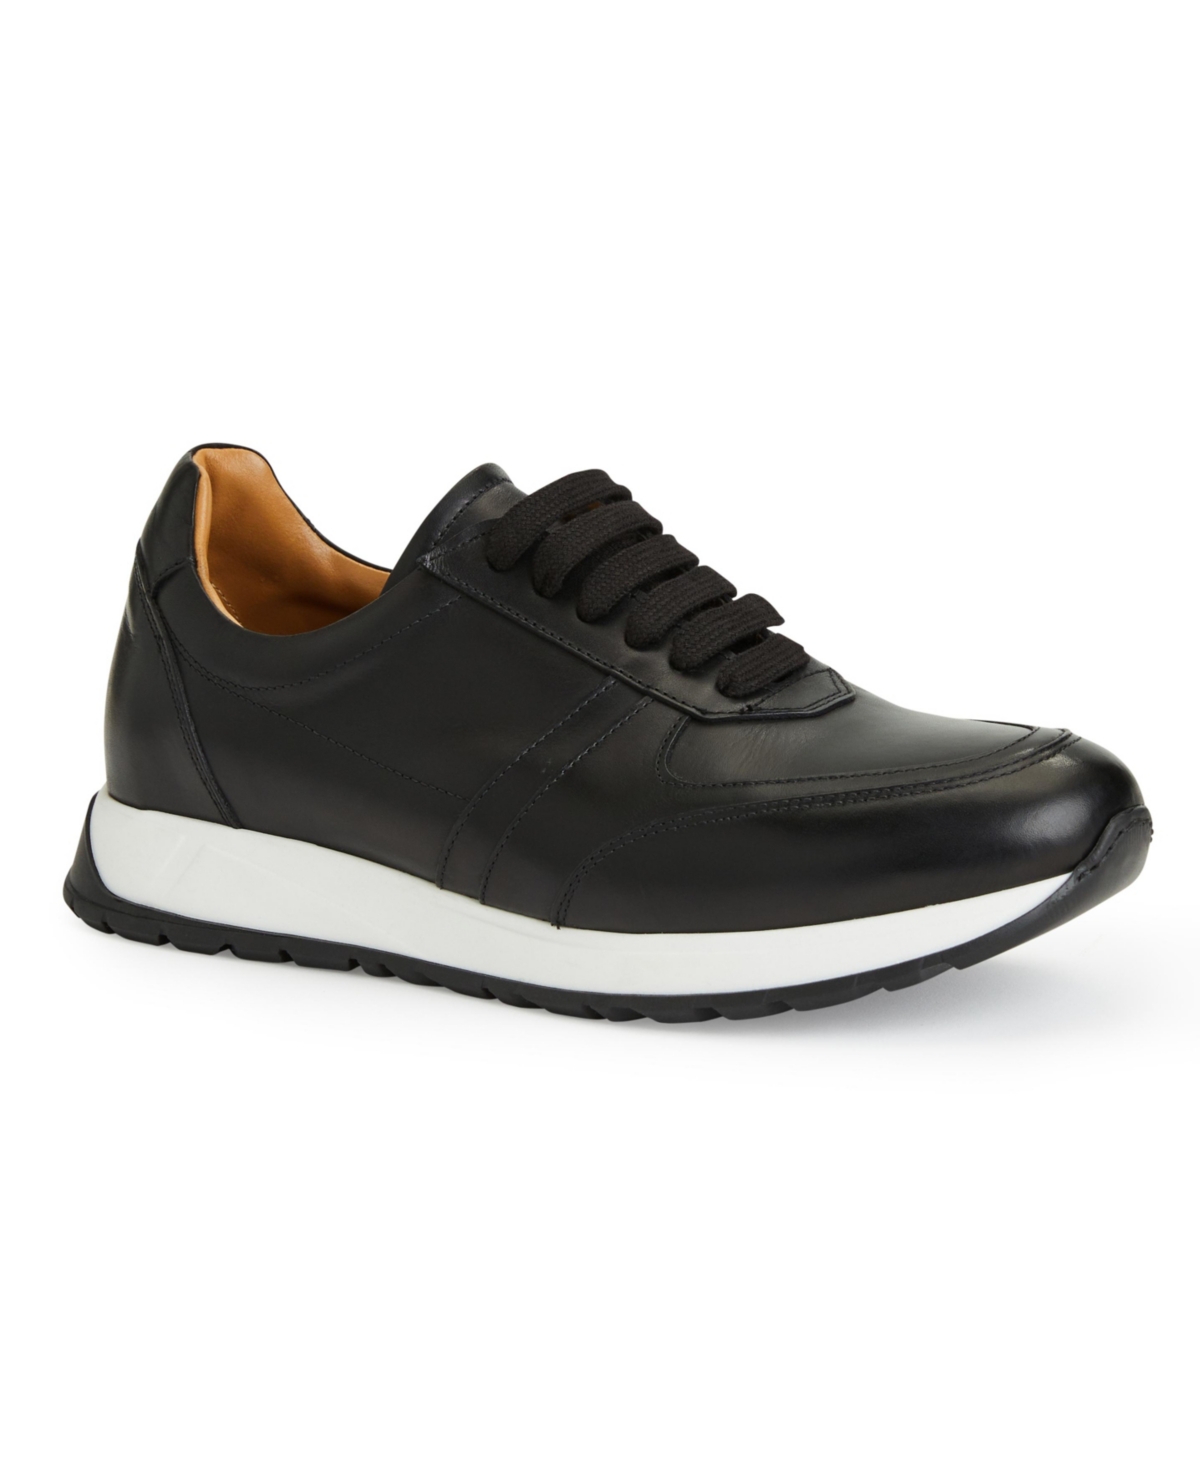 Men's Ace Suede and Leather Athletic Lace-Up Sneakers - Black